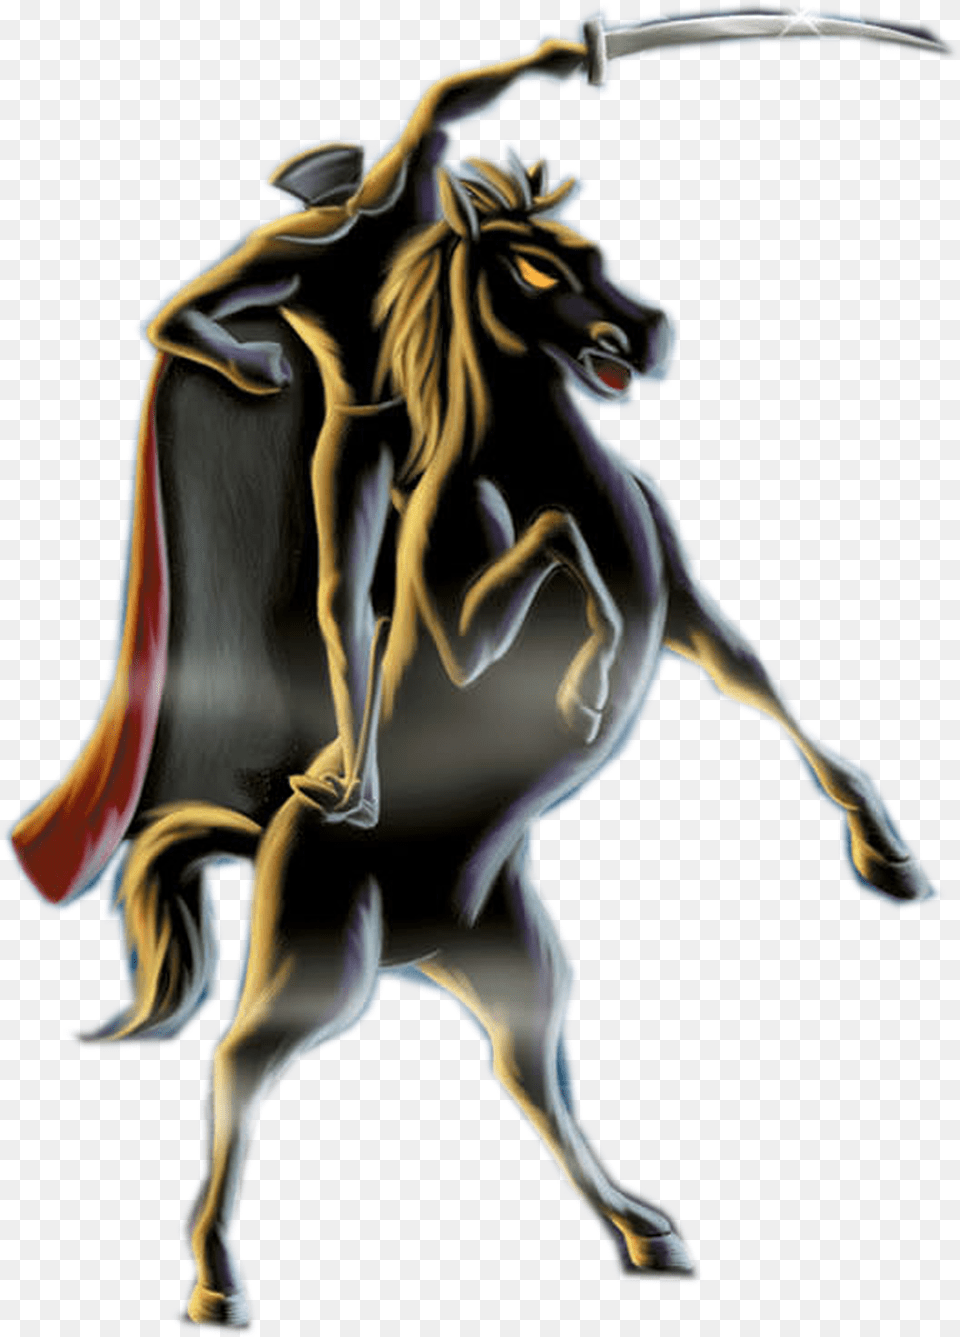 Headless Horseman Adventures Of Ichabod And Mr Toad Toys Horse Of The, Accessories, Ornament, Art, Person Png Image